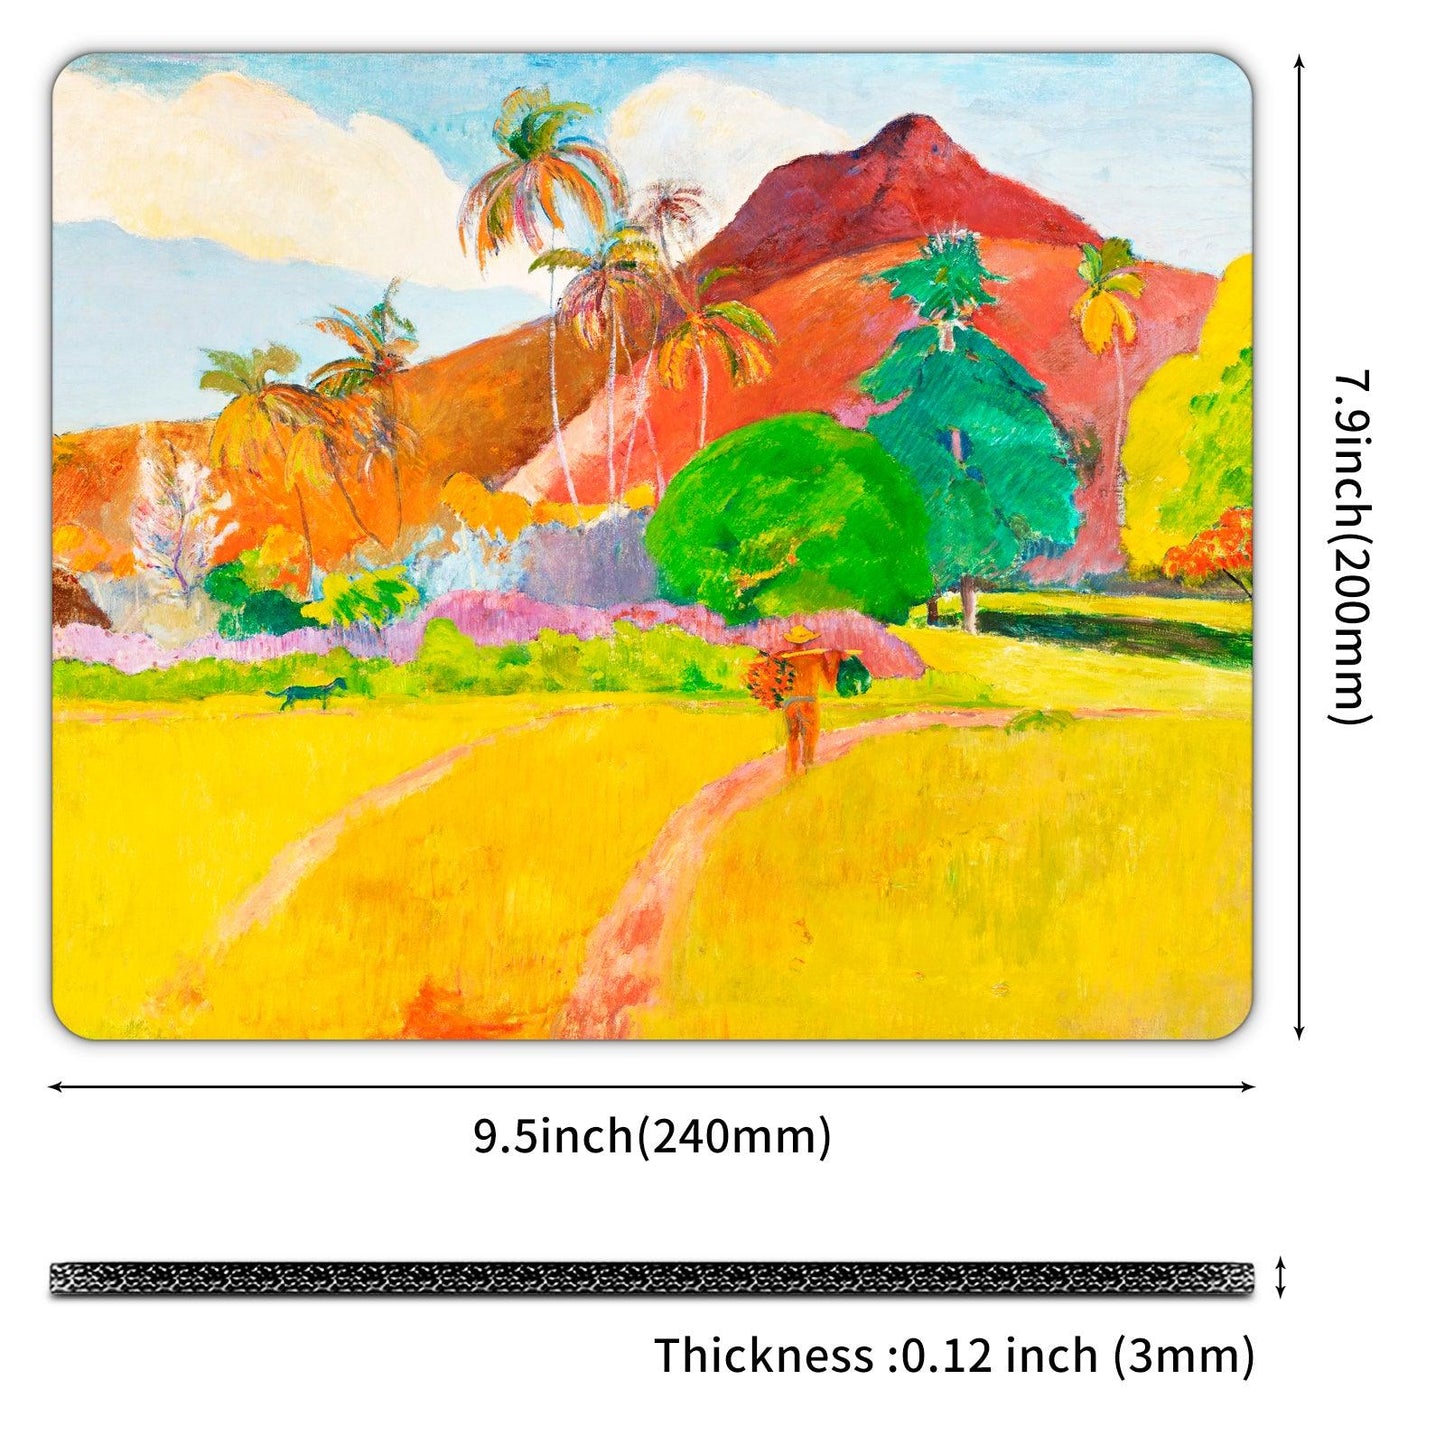 Art Square Mouse Pad 9.5 x 7.9 Inches (Tahitian Landscape by Paul Gauguin) - Berkin Arts